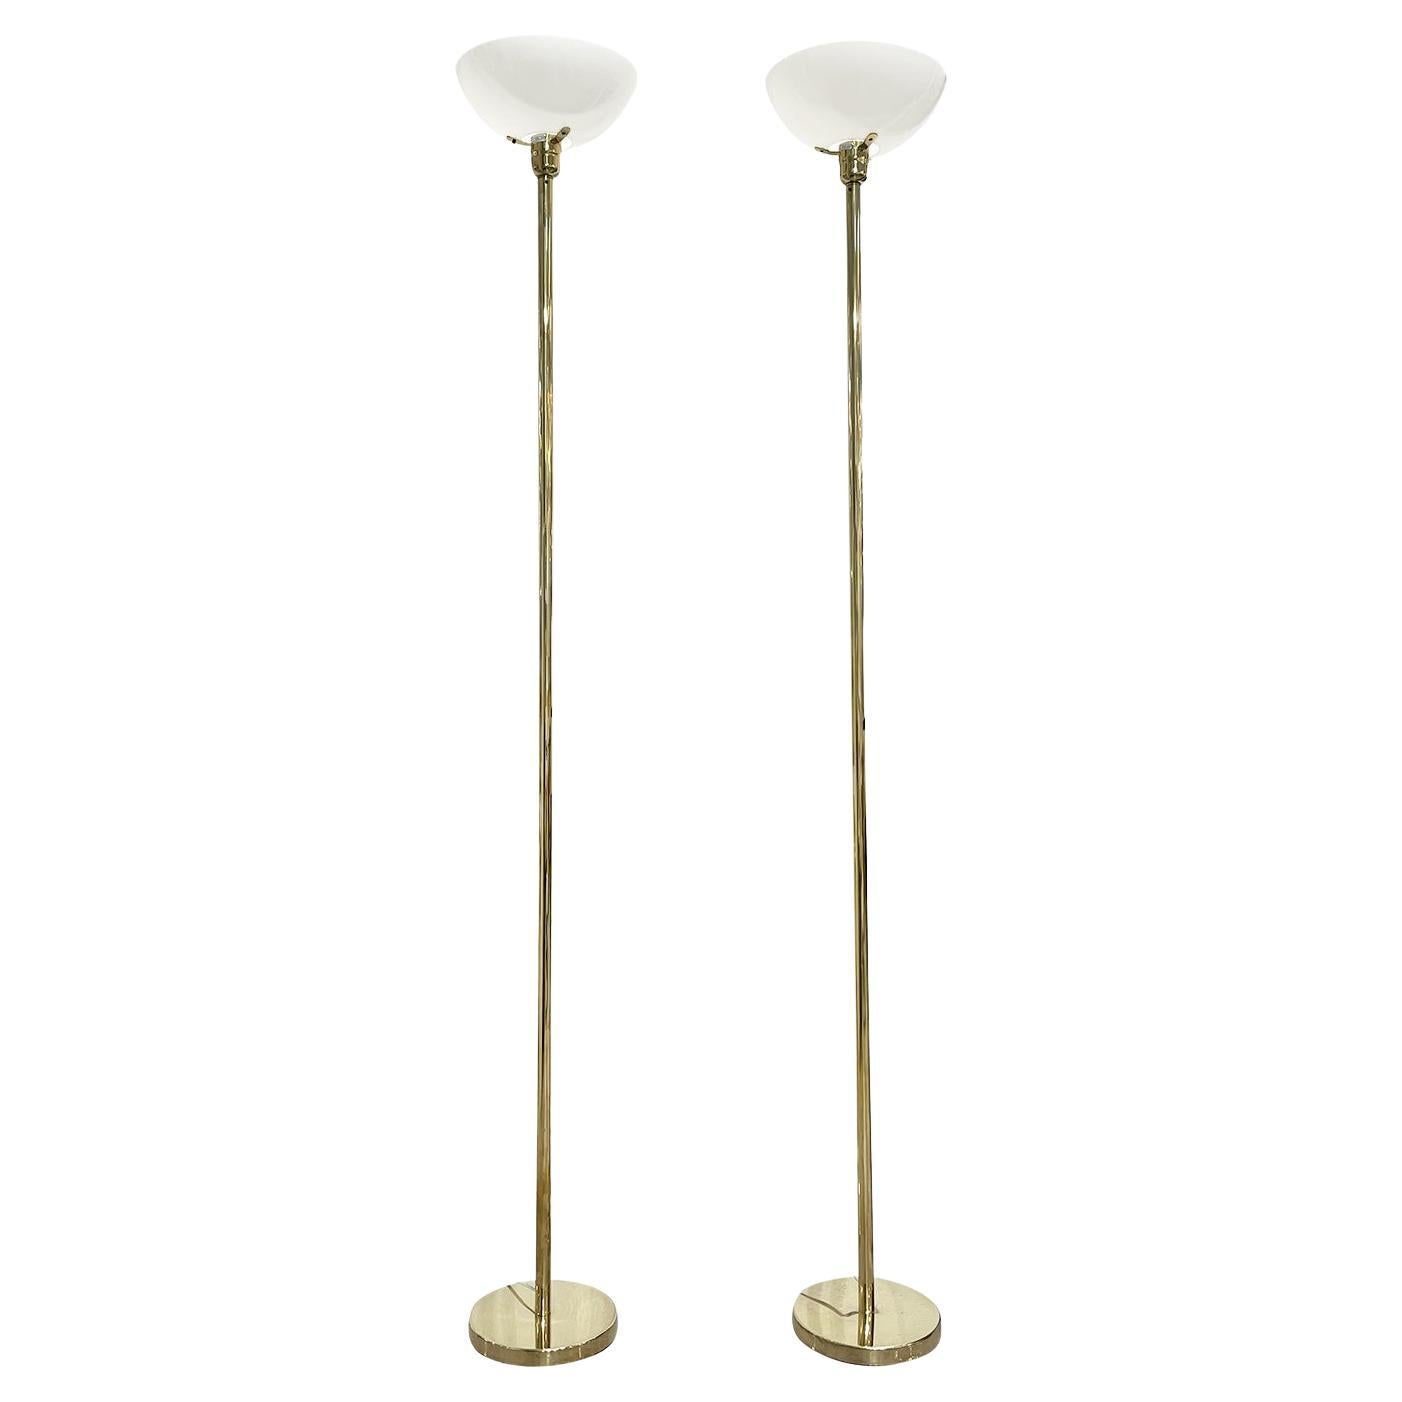 20th Century Swedish Pair of Markaryd Brass Floor Lamps by Hans-Agne Jakobsson For Sale